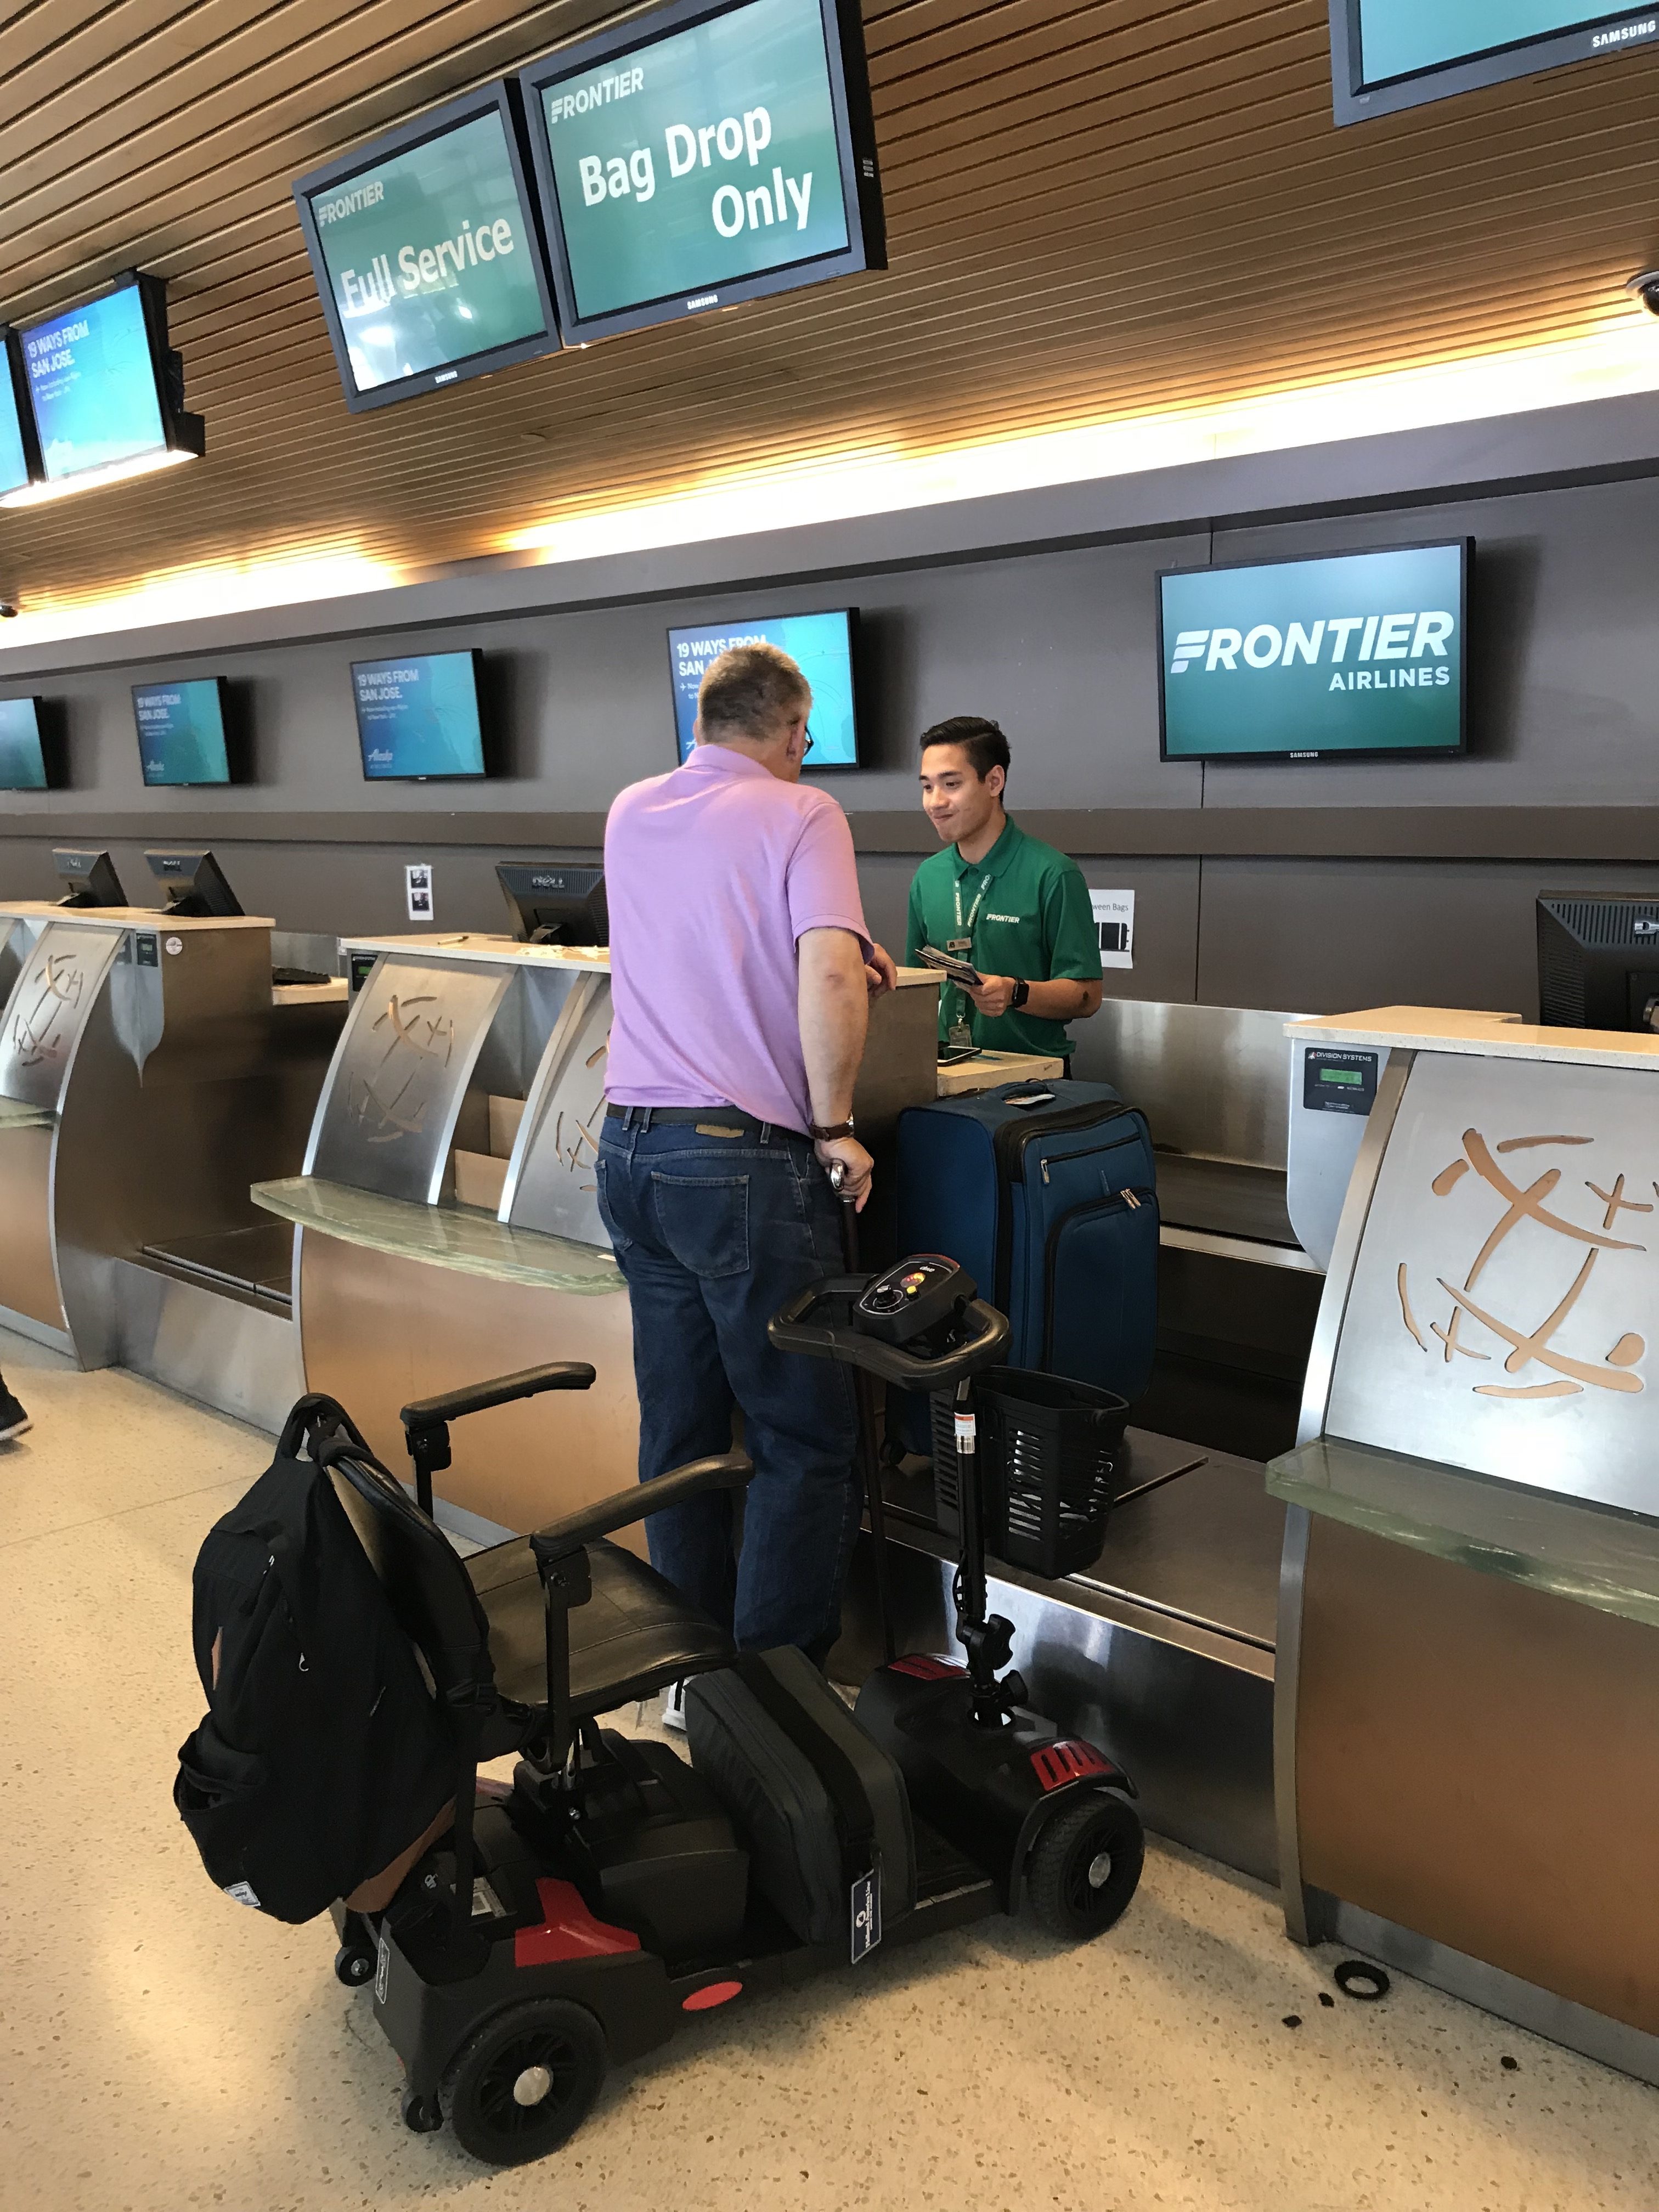 Checking in to fly with a scooter.